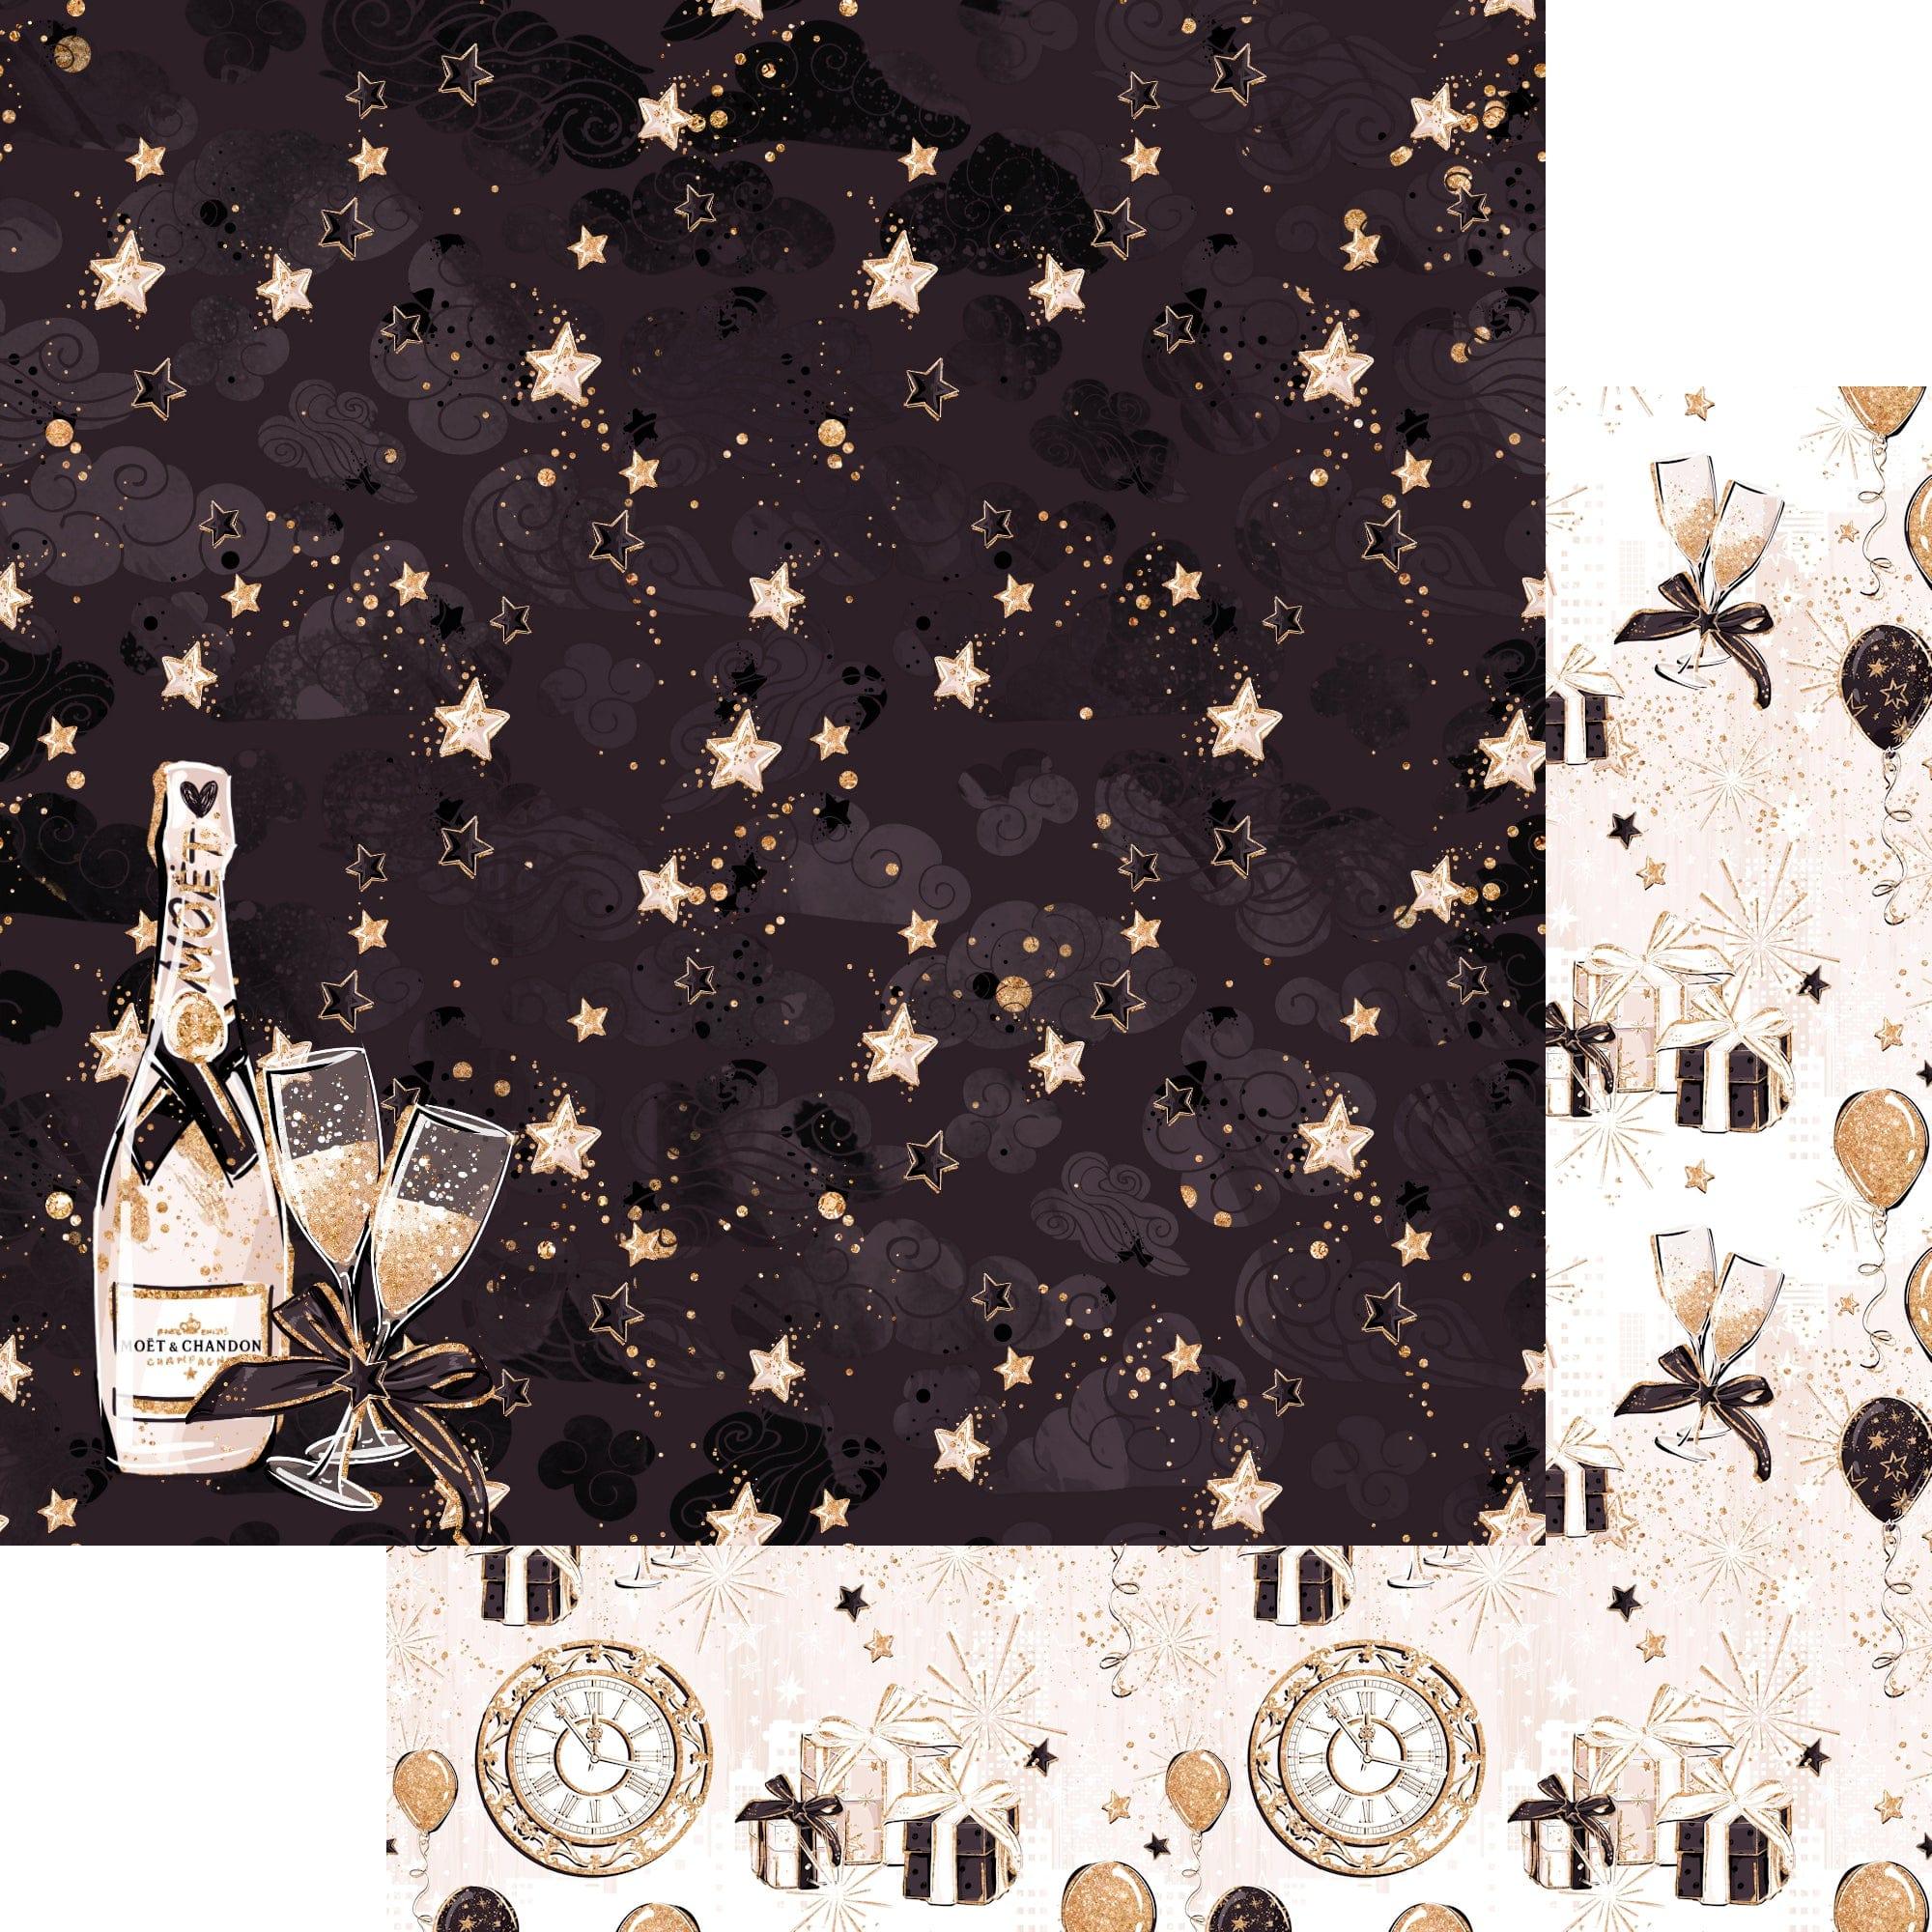 New Year's Eve 2023 Celebration Collection Let's Toast 12 x 12 Double-Sided Scrapbook Paper by SSC Designs - Scrapbook Supply Companies